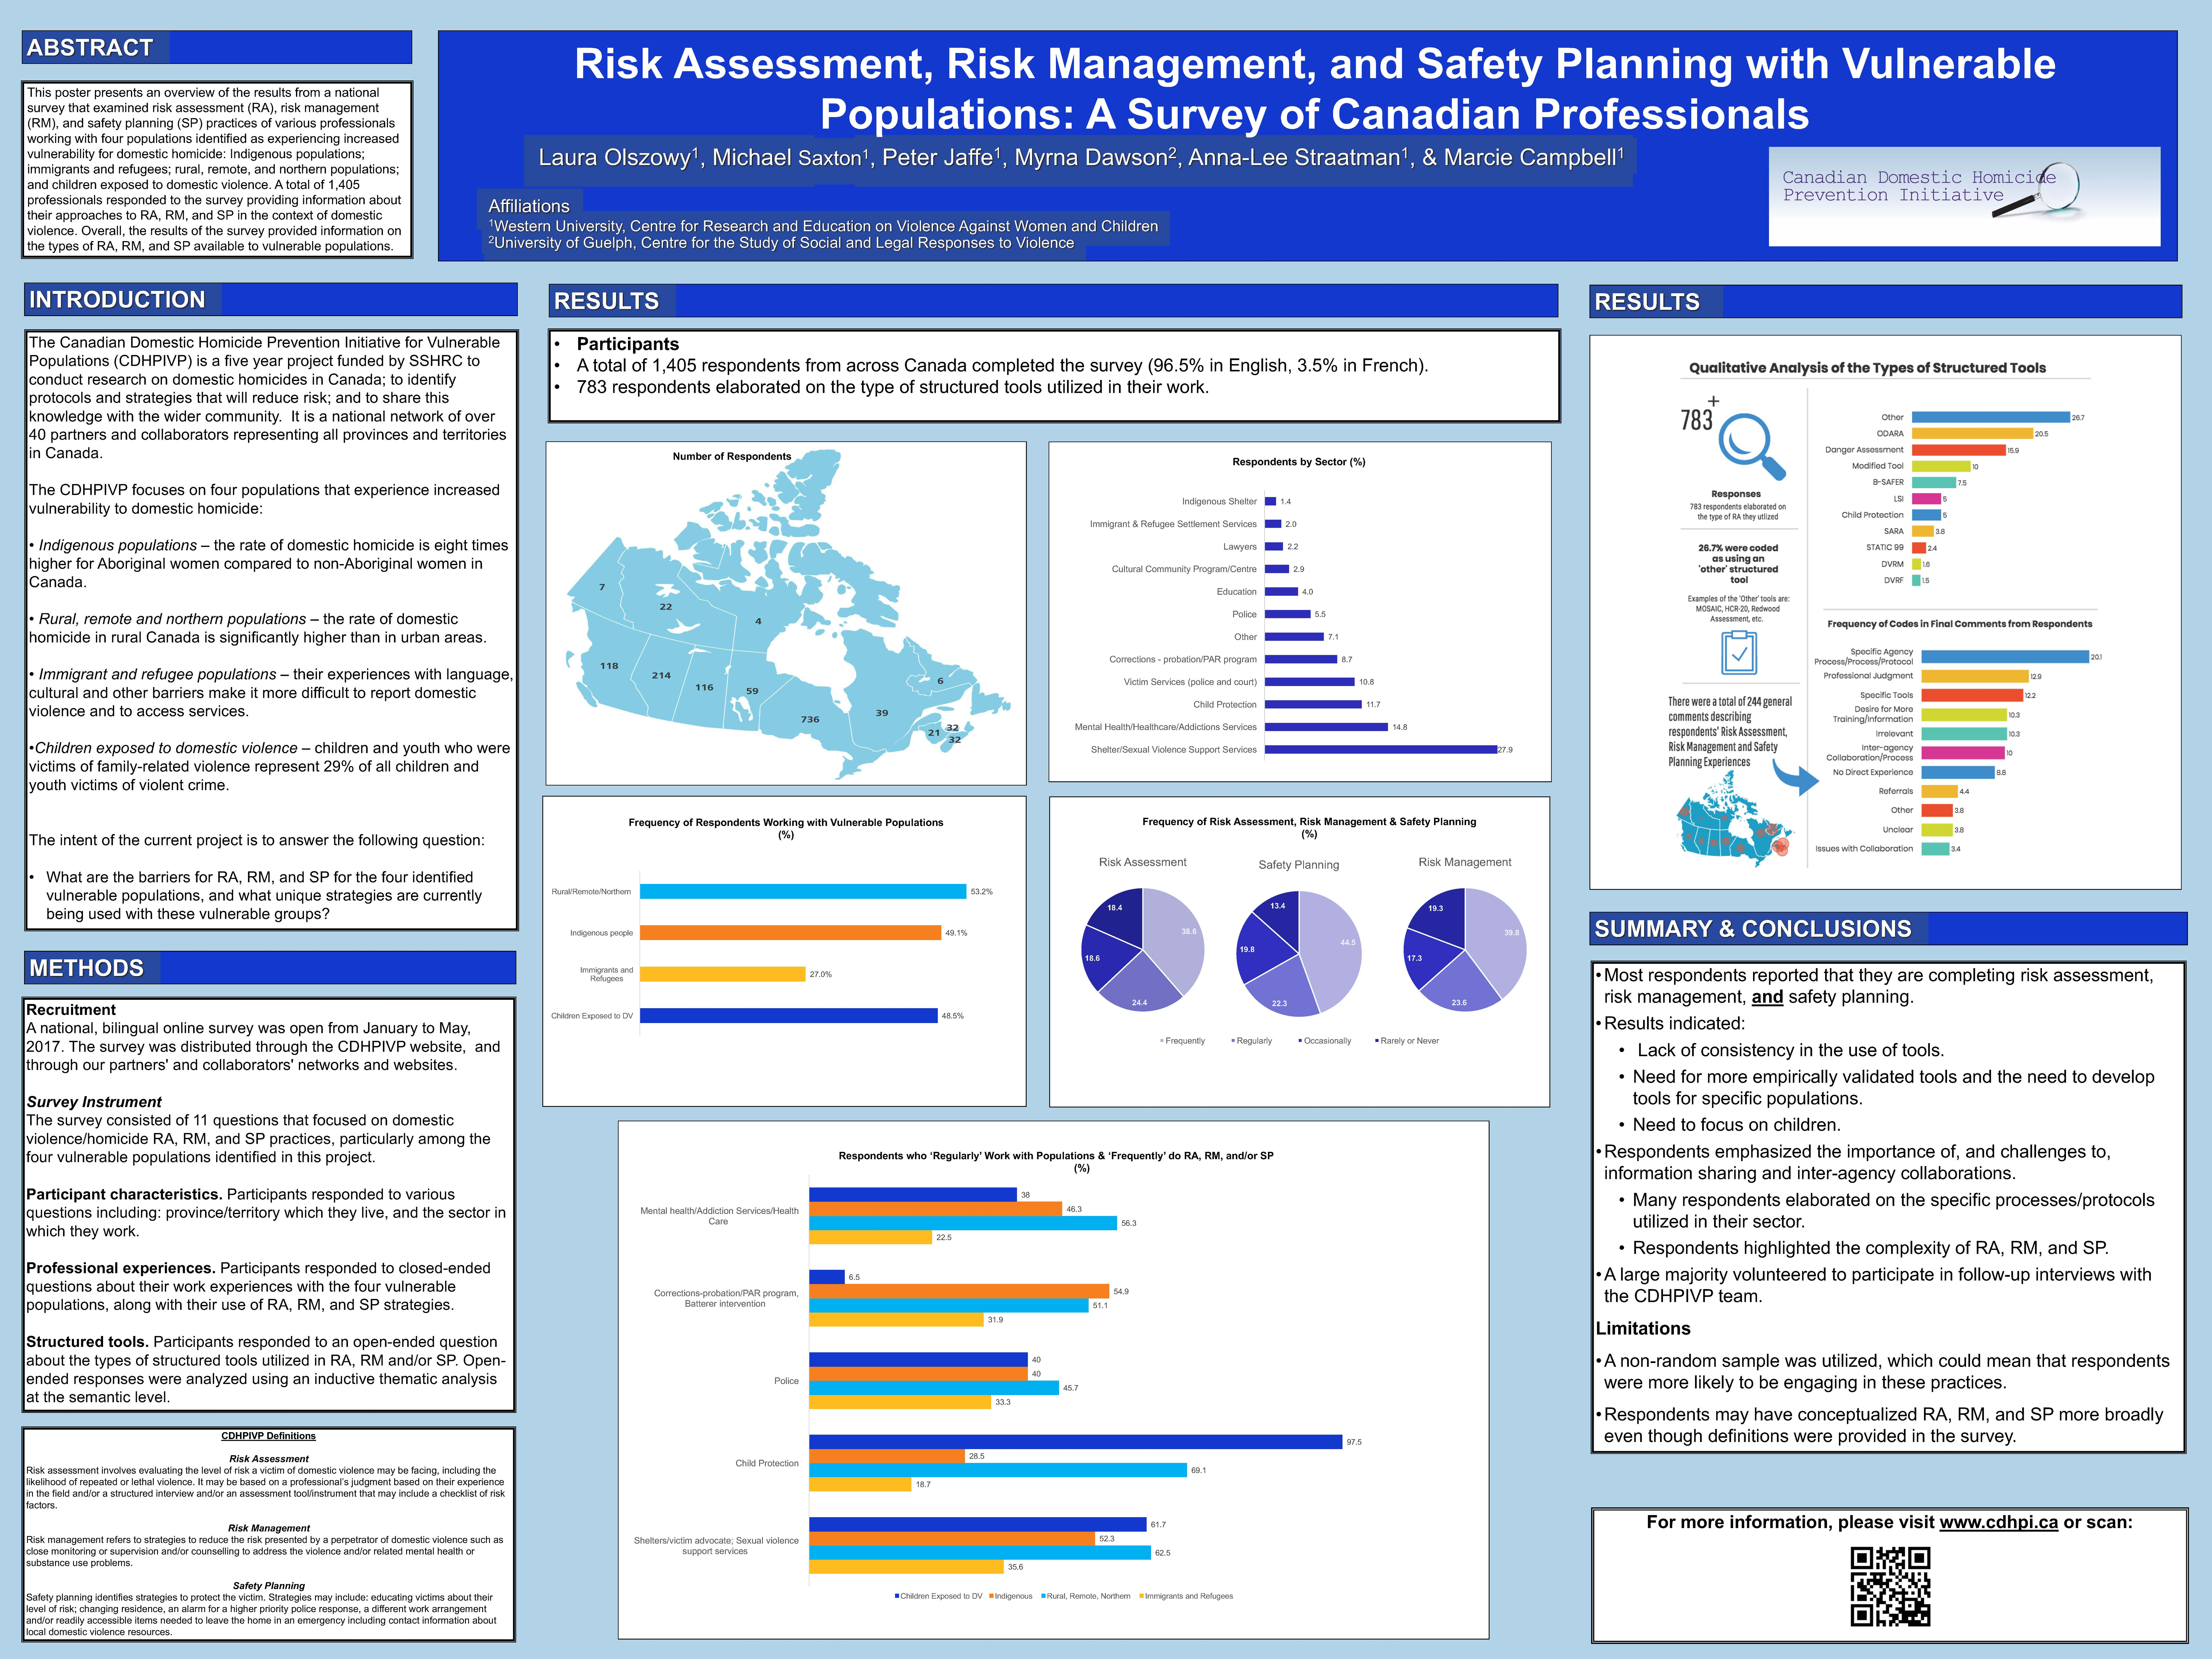 Risk Assessment, Risk Management, and Safety Planning with Vulnerable Populations: A Survey of Canadian Professionals Poster